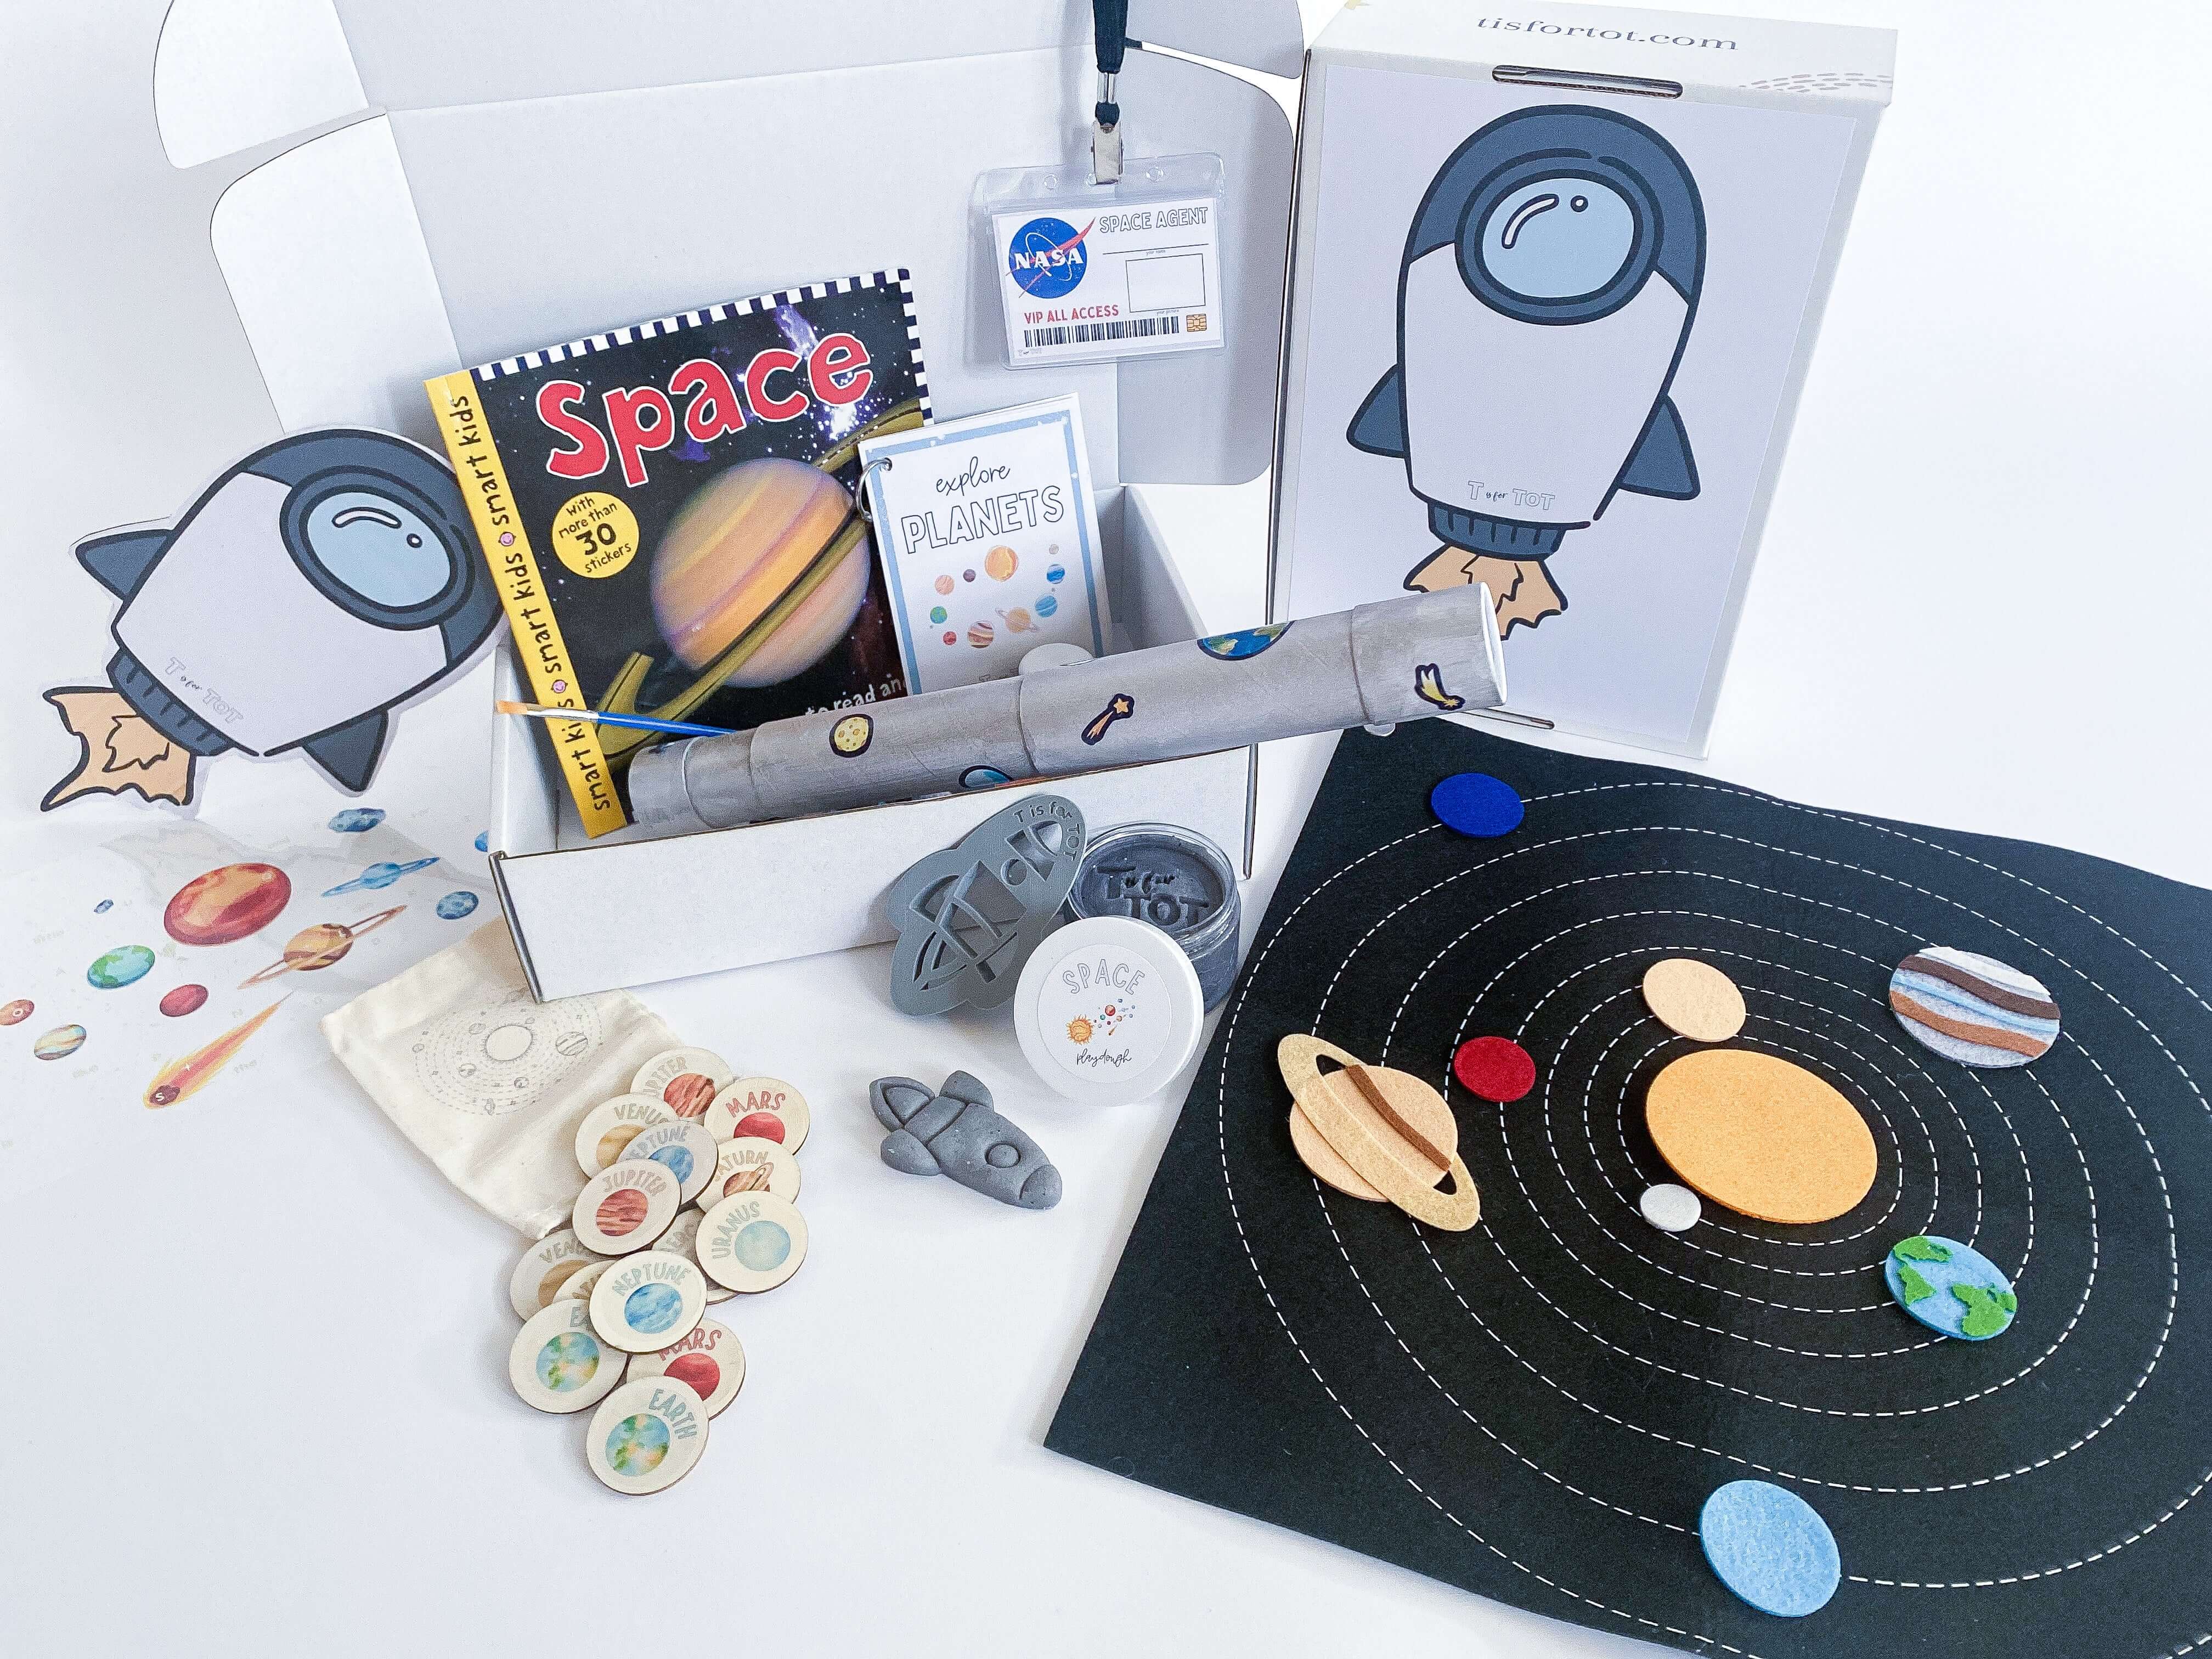 Space-themed play kit for kids with homemade playdough, rocket playdough cutter, and custom-made felt space mat. Includes telescope activity, wooden planet memory game, NASA name badge, STEAM recipe card, and a box that turns into a rocket backpack. Perfect for creative play and learning.